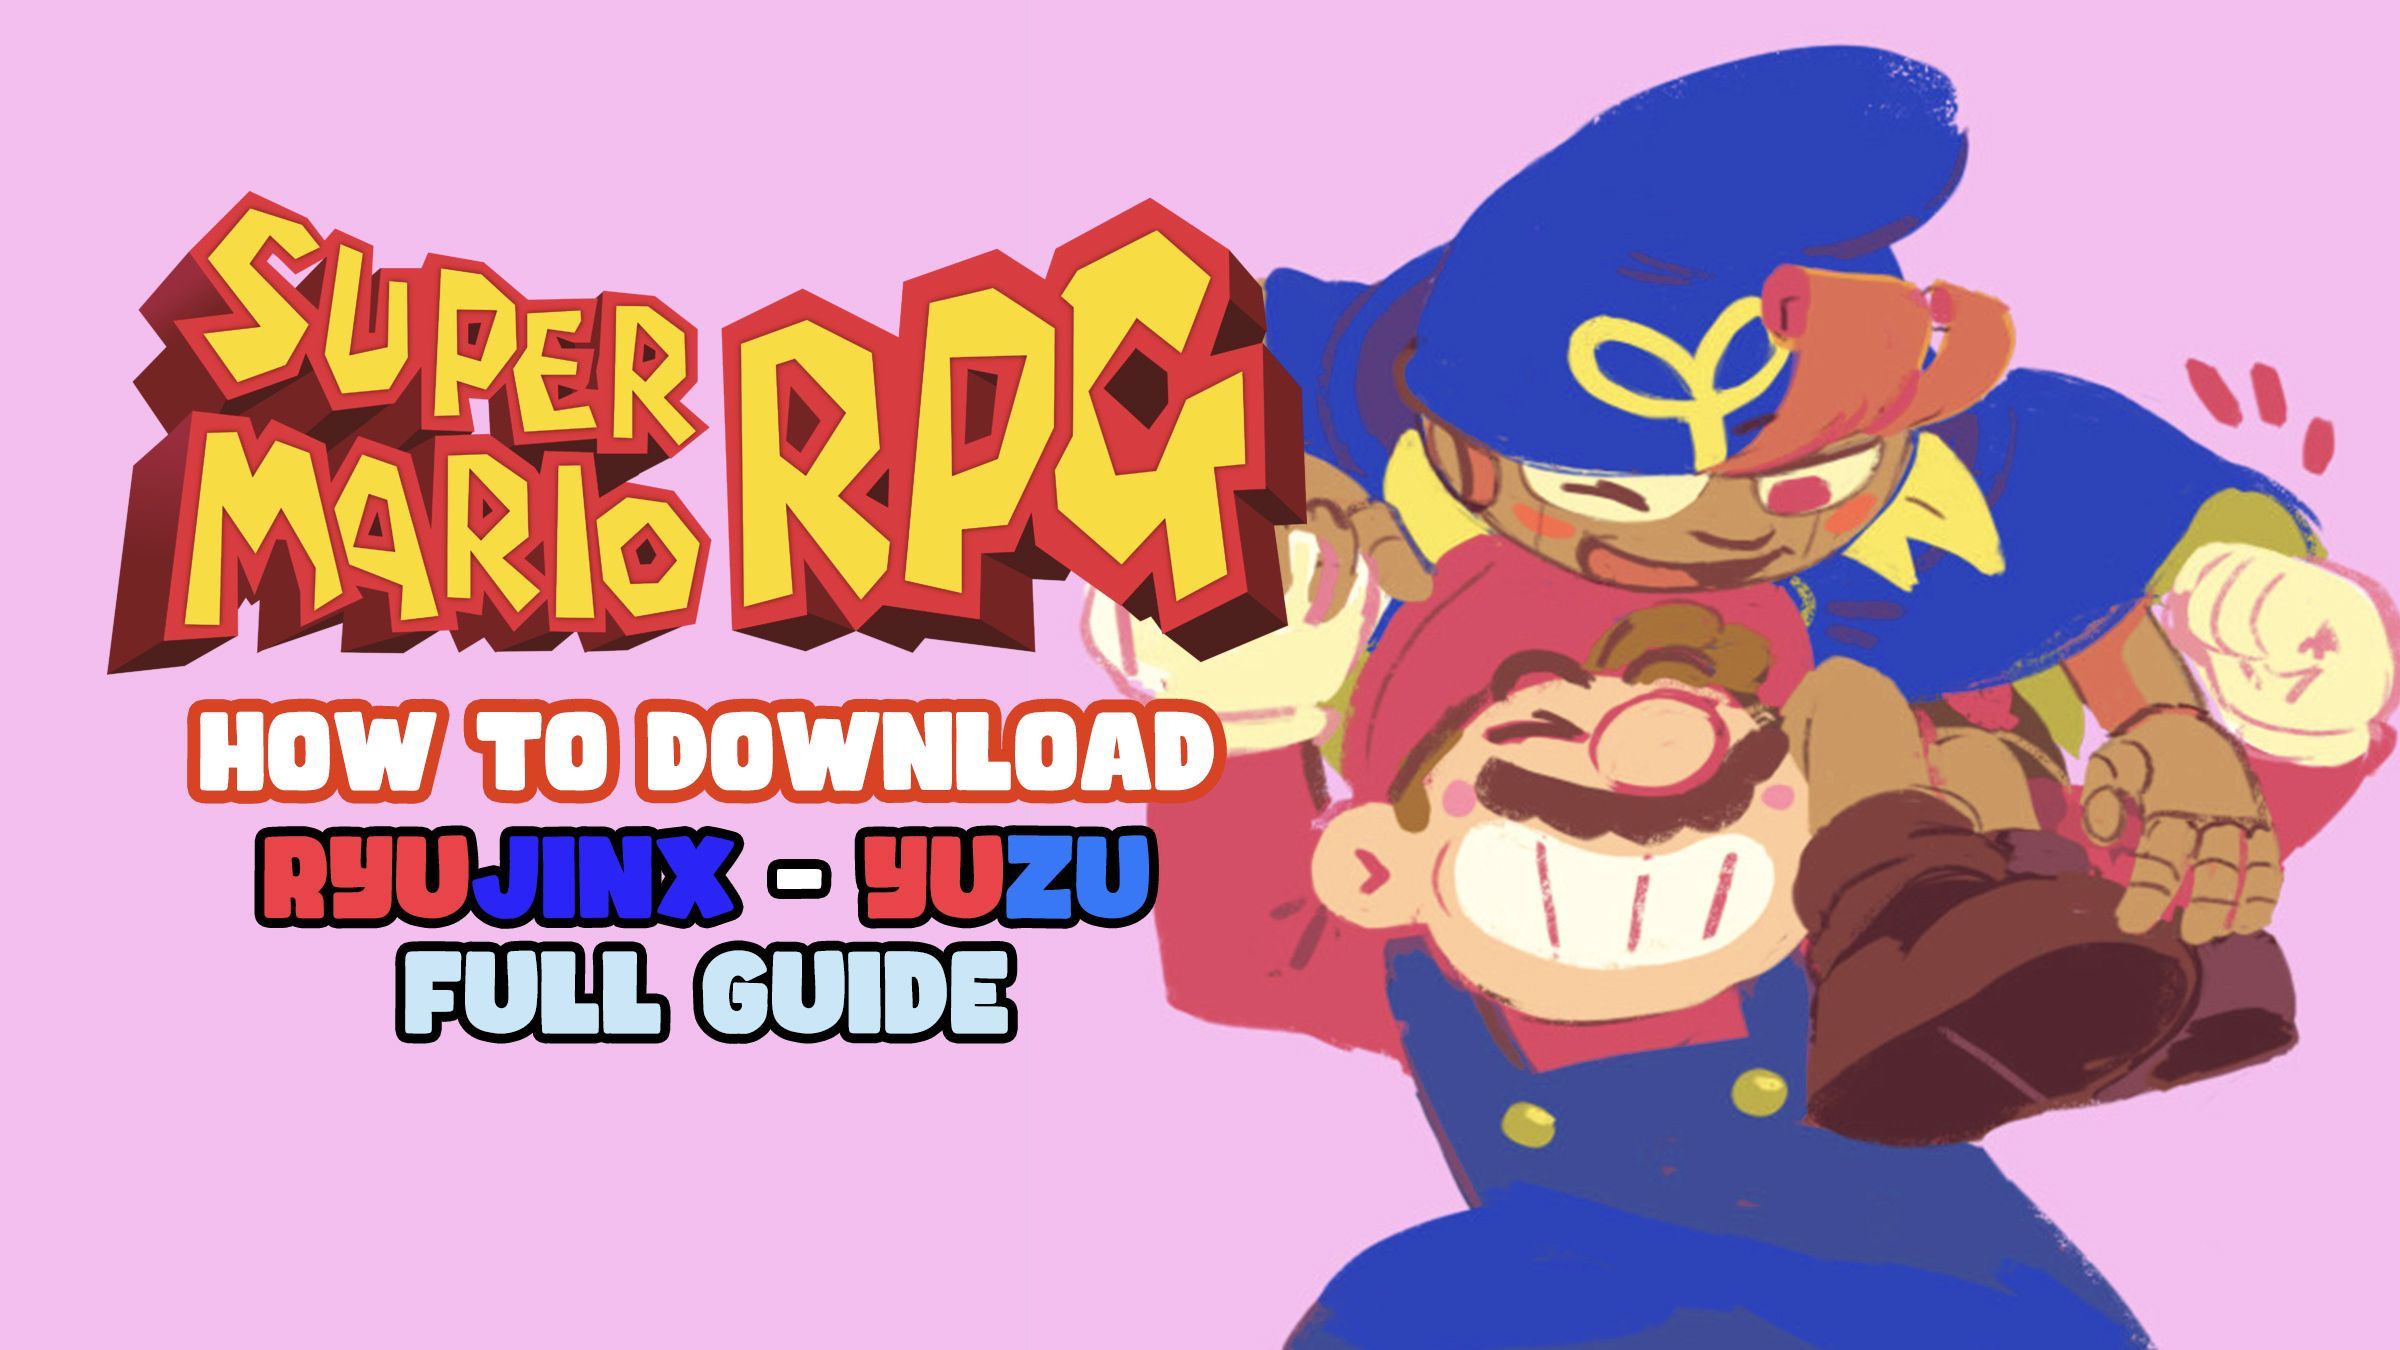 How to download and play Super Mario RPG Remake on PC (XCI) YUZU-RYUJINX  GUIDE - Bstation